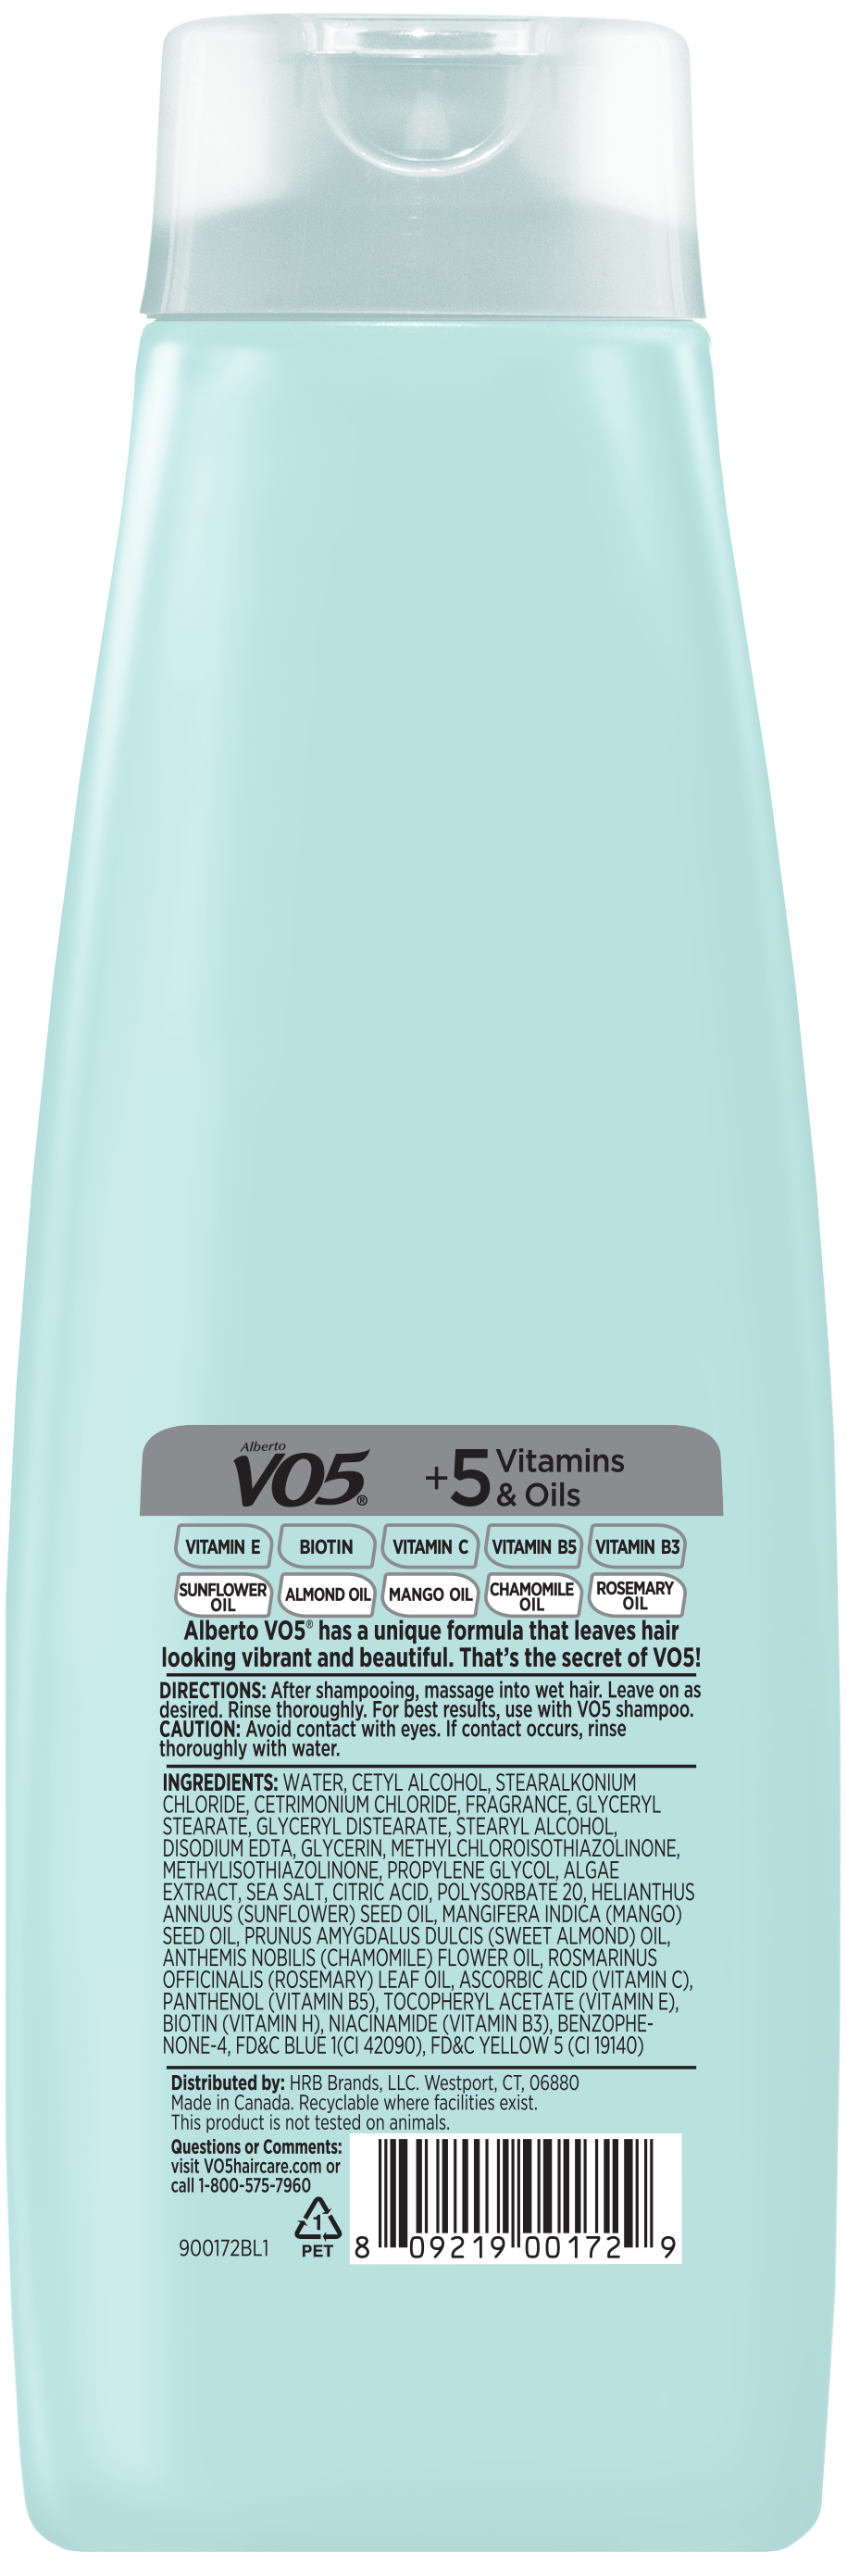 Alberto VO5 Ocean Refresh Revitalizing Conditioner with Sea Minerals, for All Hair Types, 16.9 fl oz - image 2 of 6